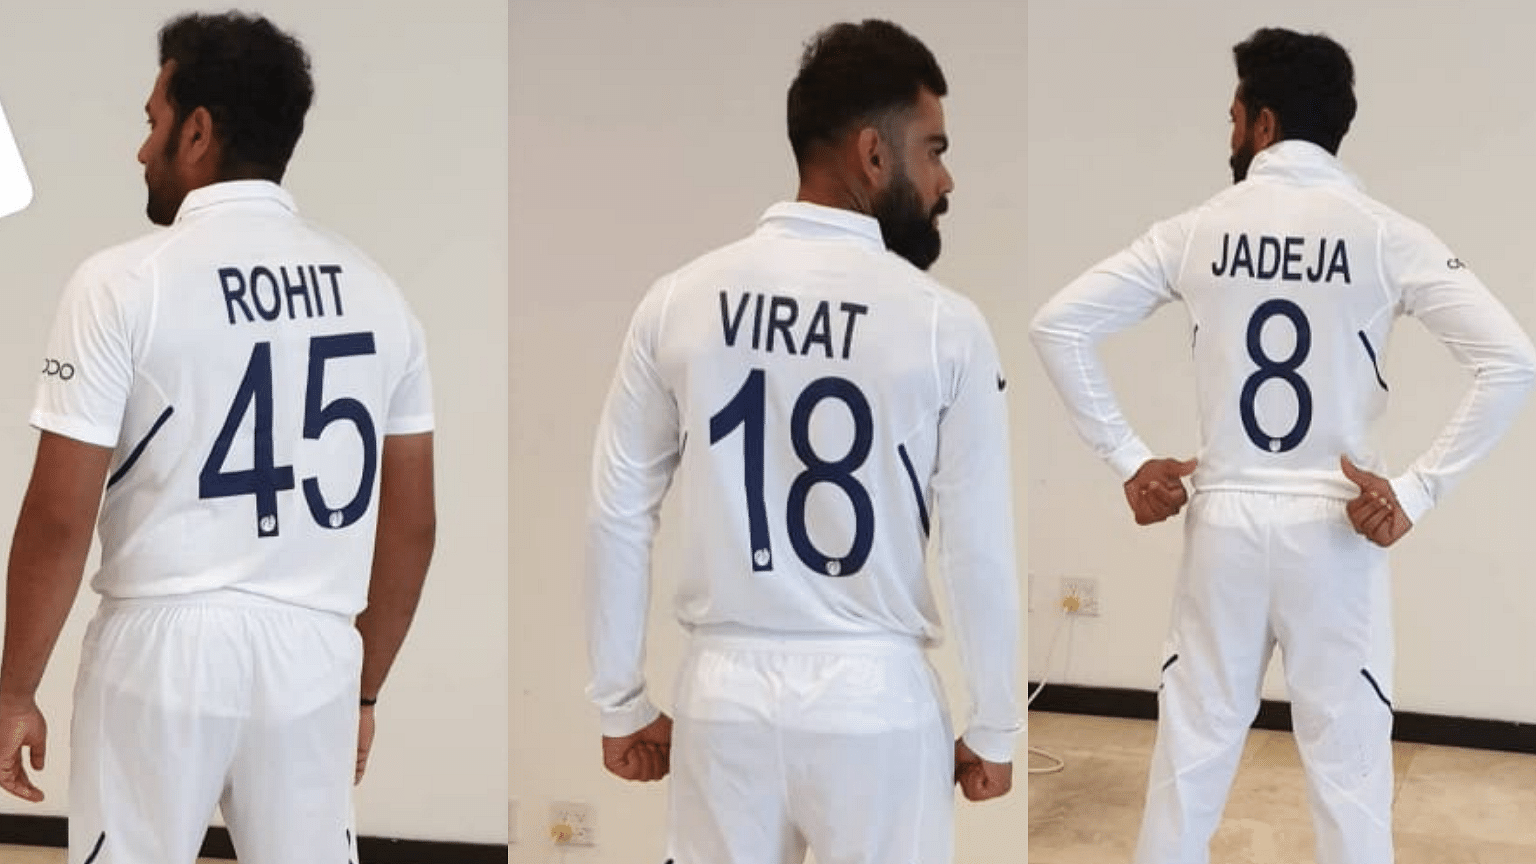 rohit sharma test jersey number